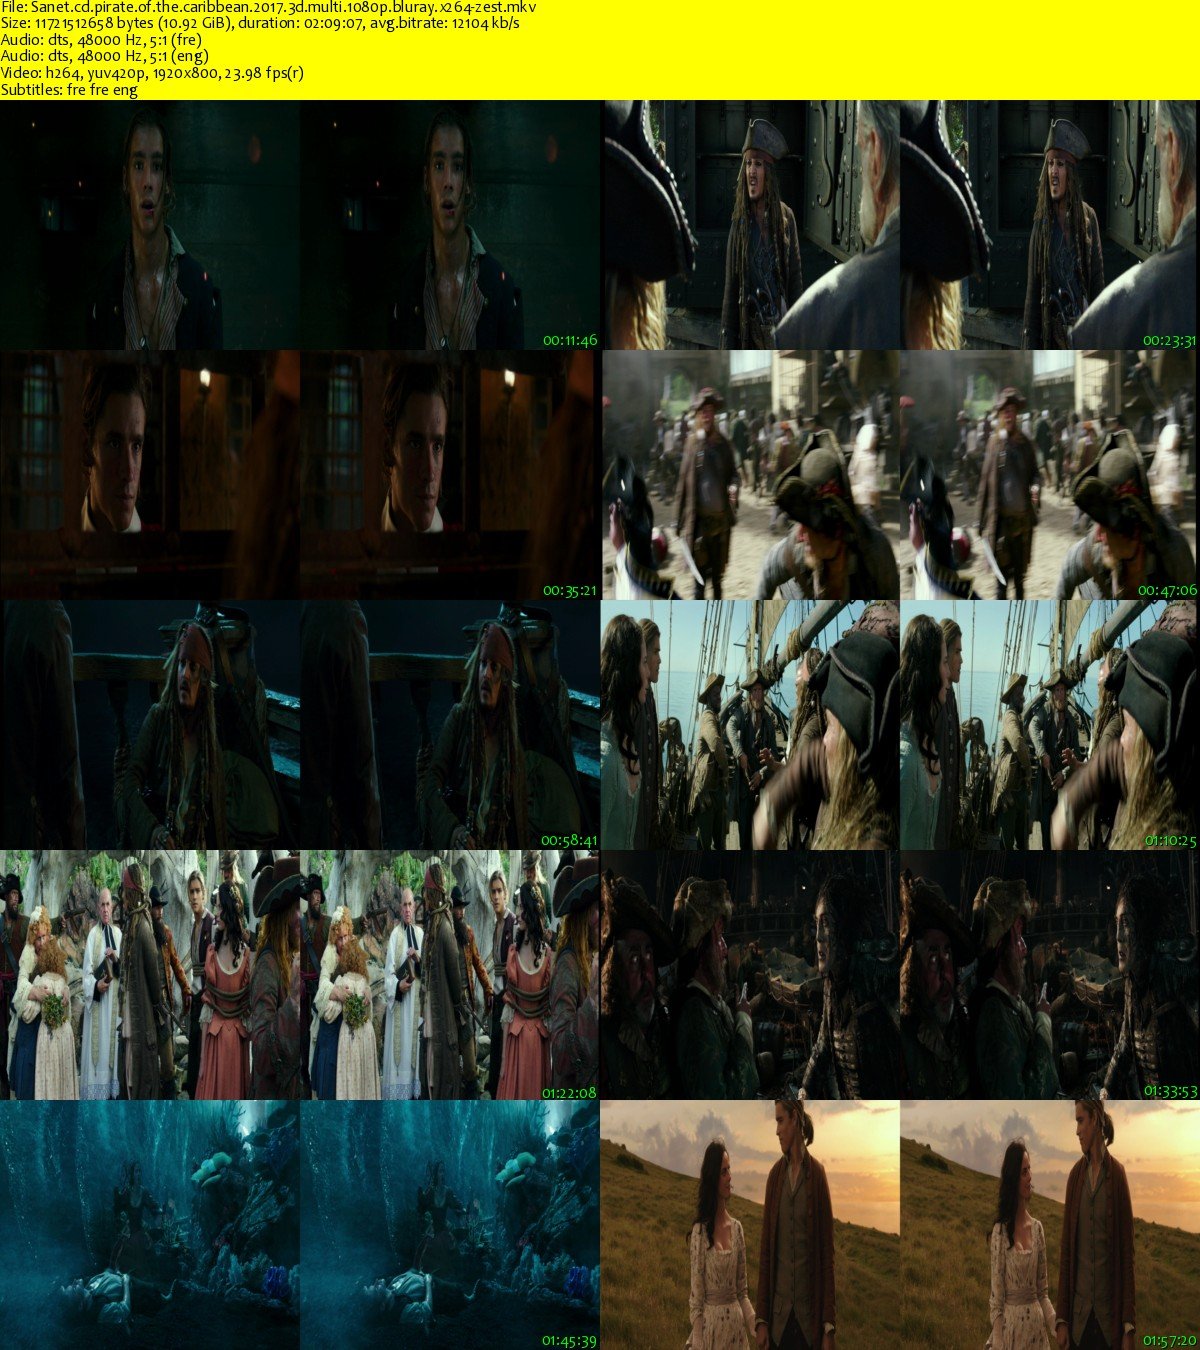 Pirates Of The Caribbean 1, 2, 3, 4, 5 - 2003-2017 Bluray